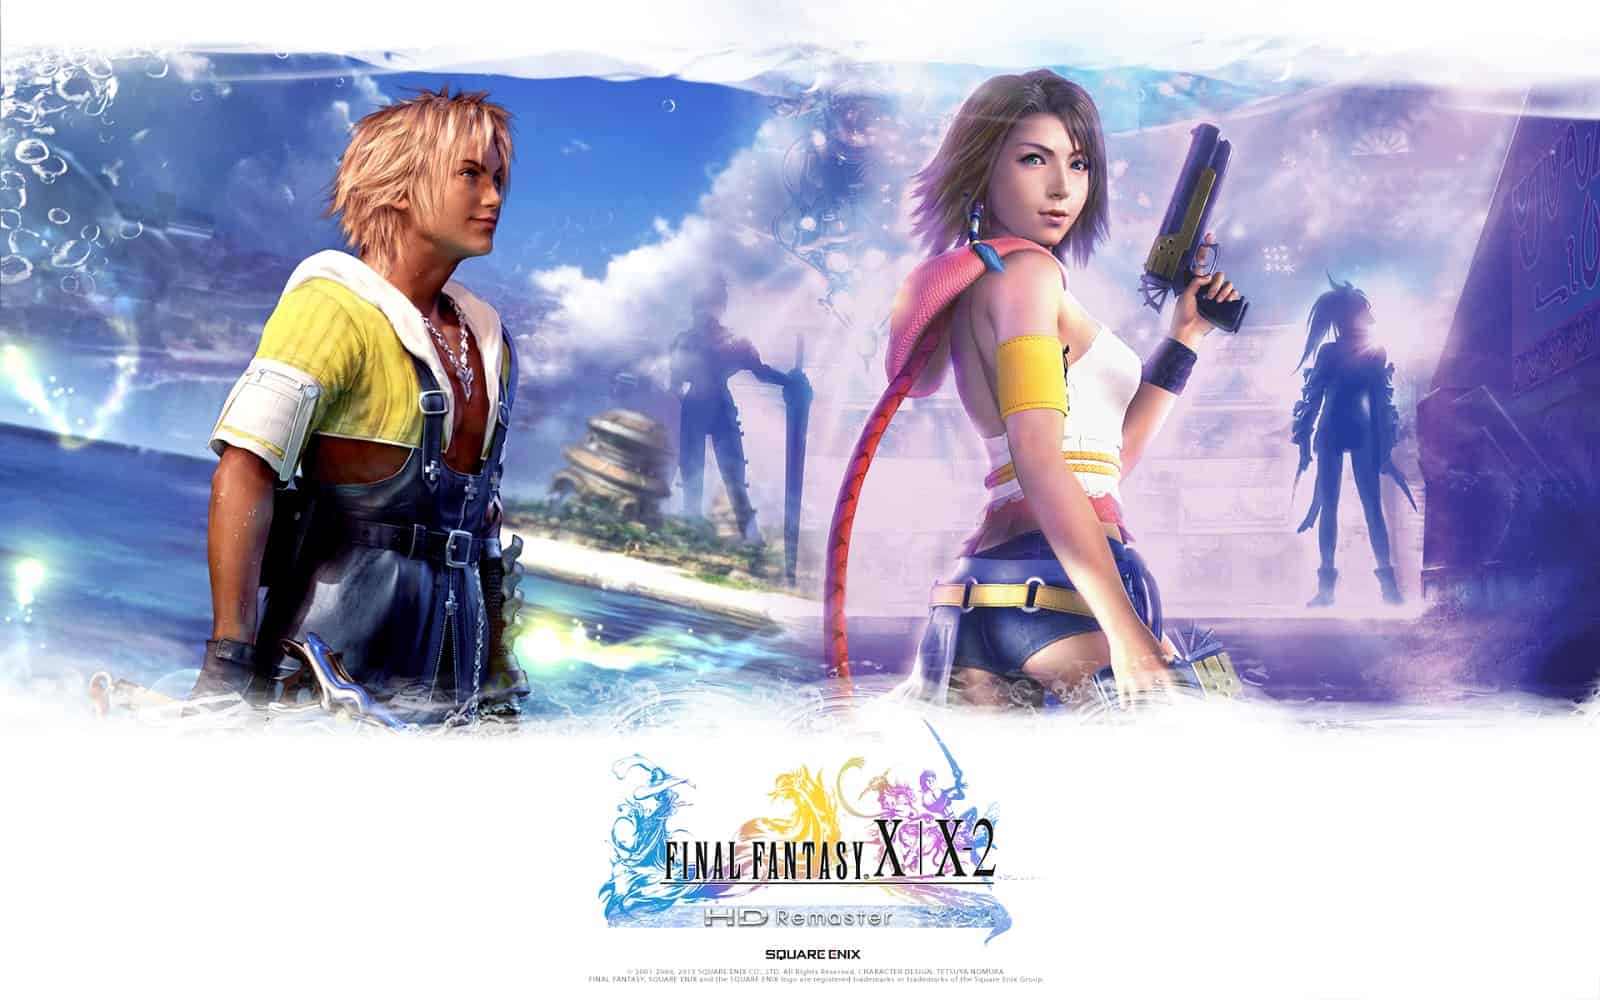 download final fantasy x 2 hd remaster for free